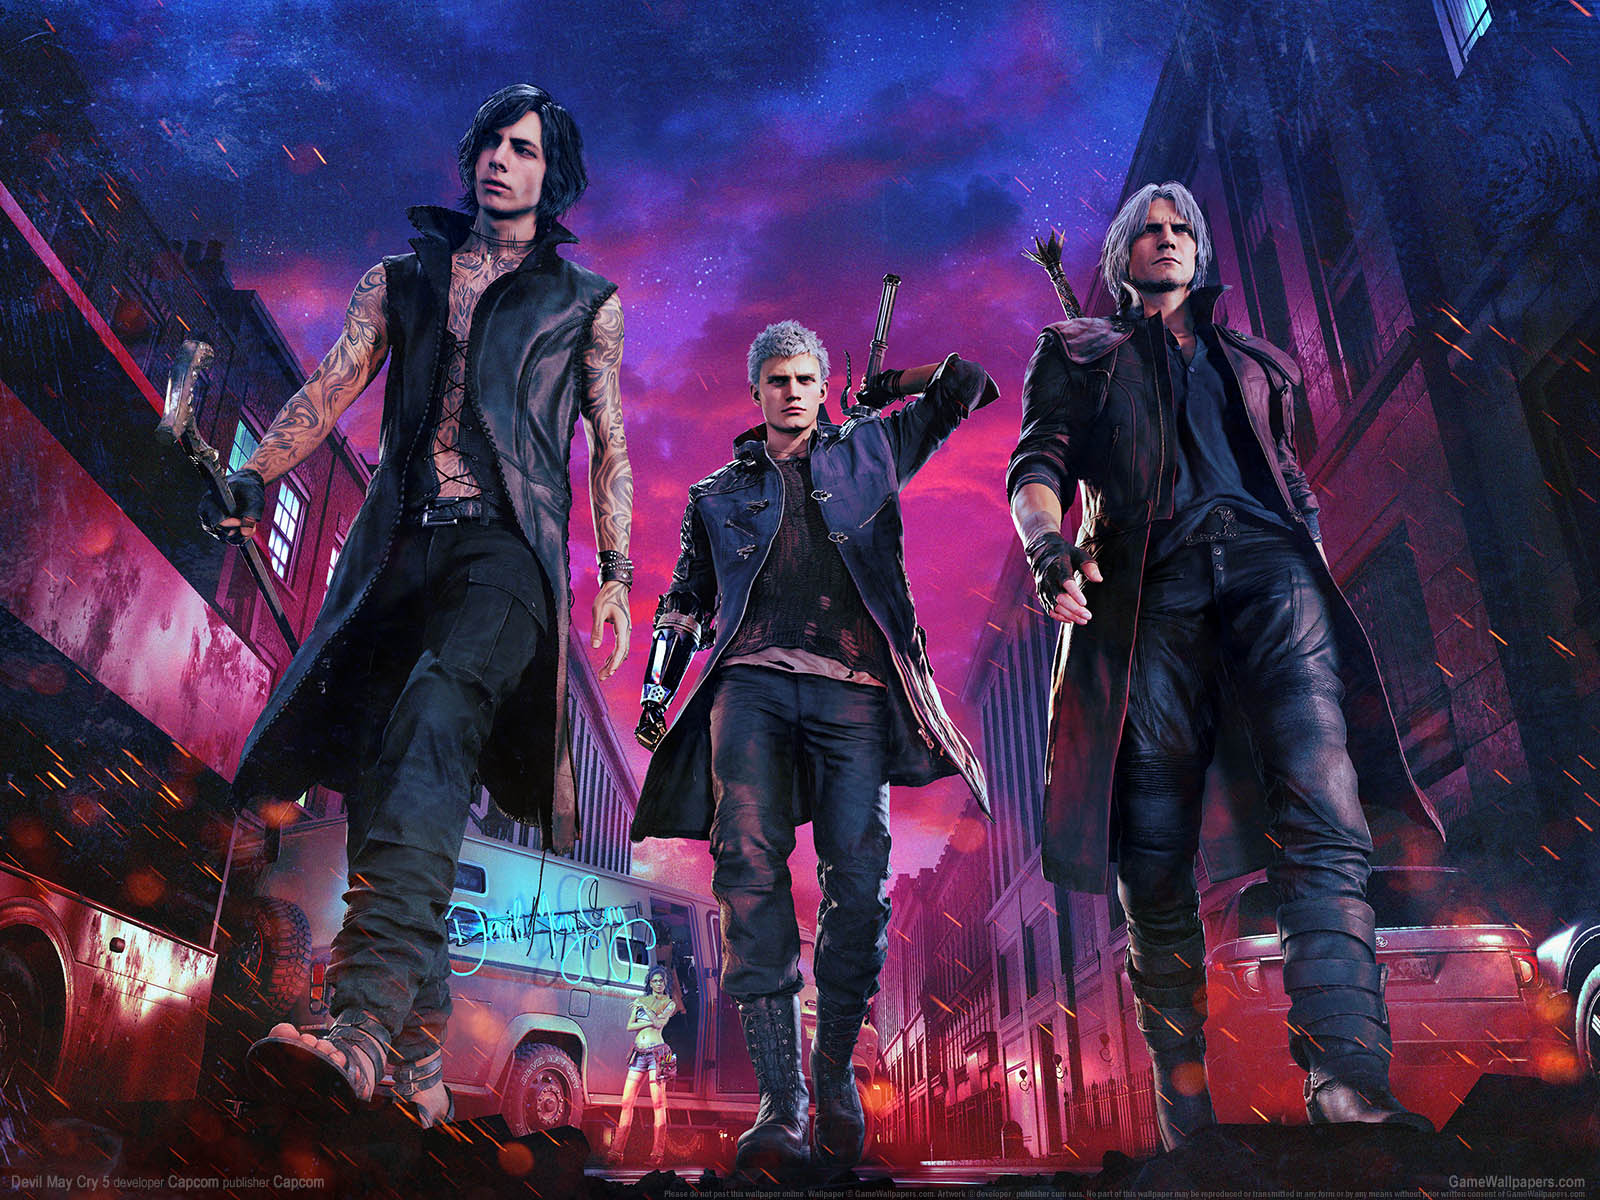 Devil May Cry 5 achtergrond 01 1600x1200